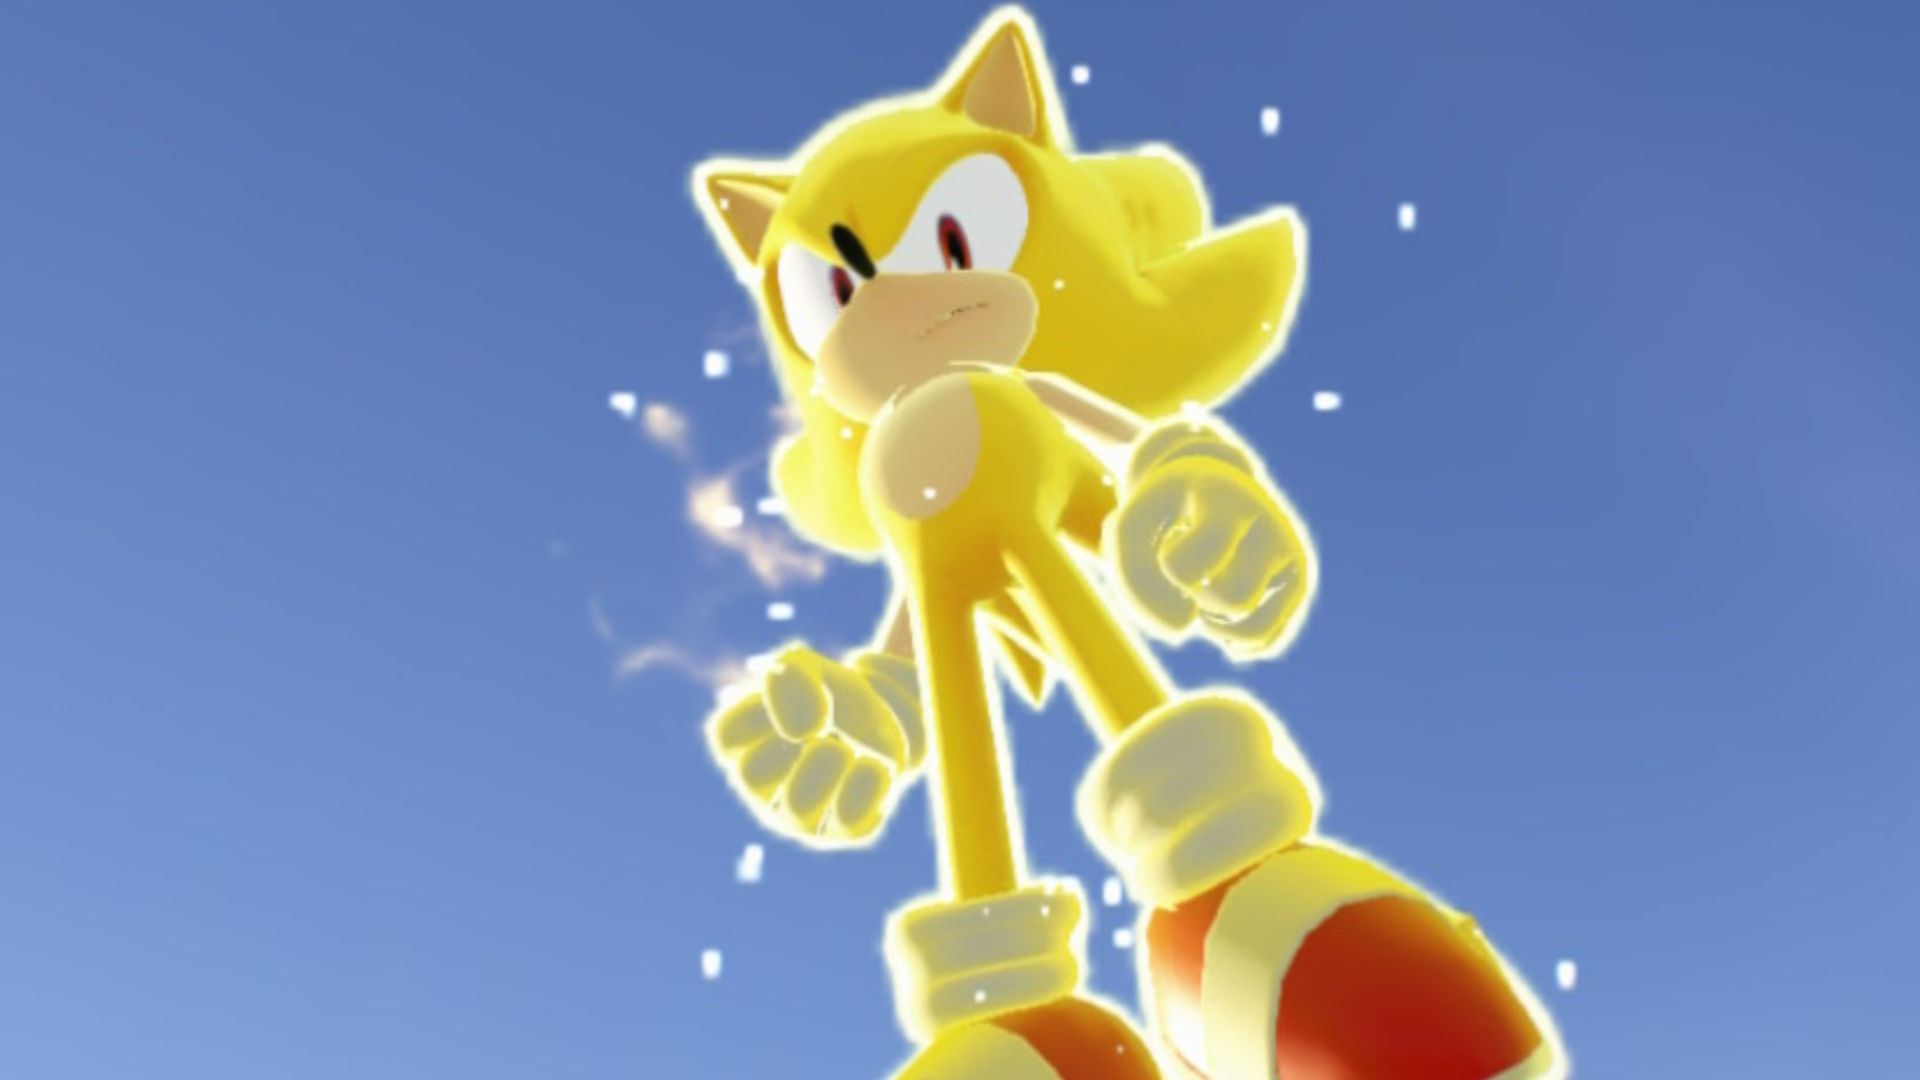 Here's a first look at Super Sonic in Sonic Frontiers